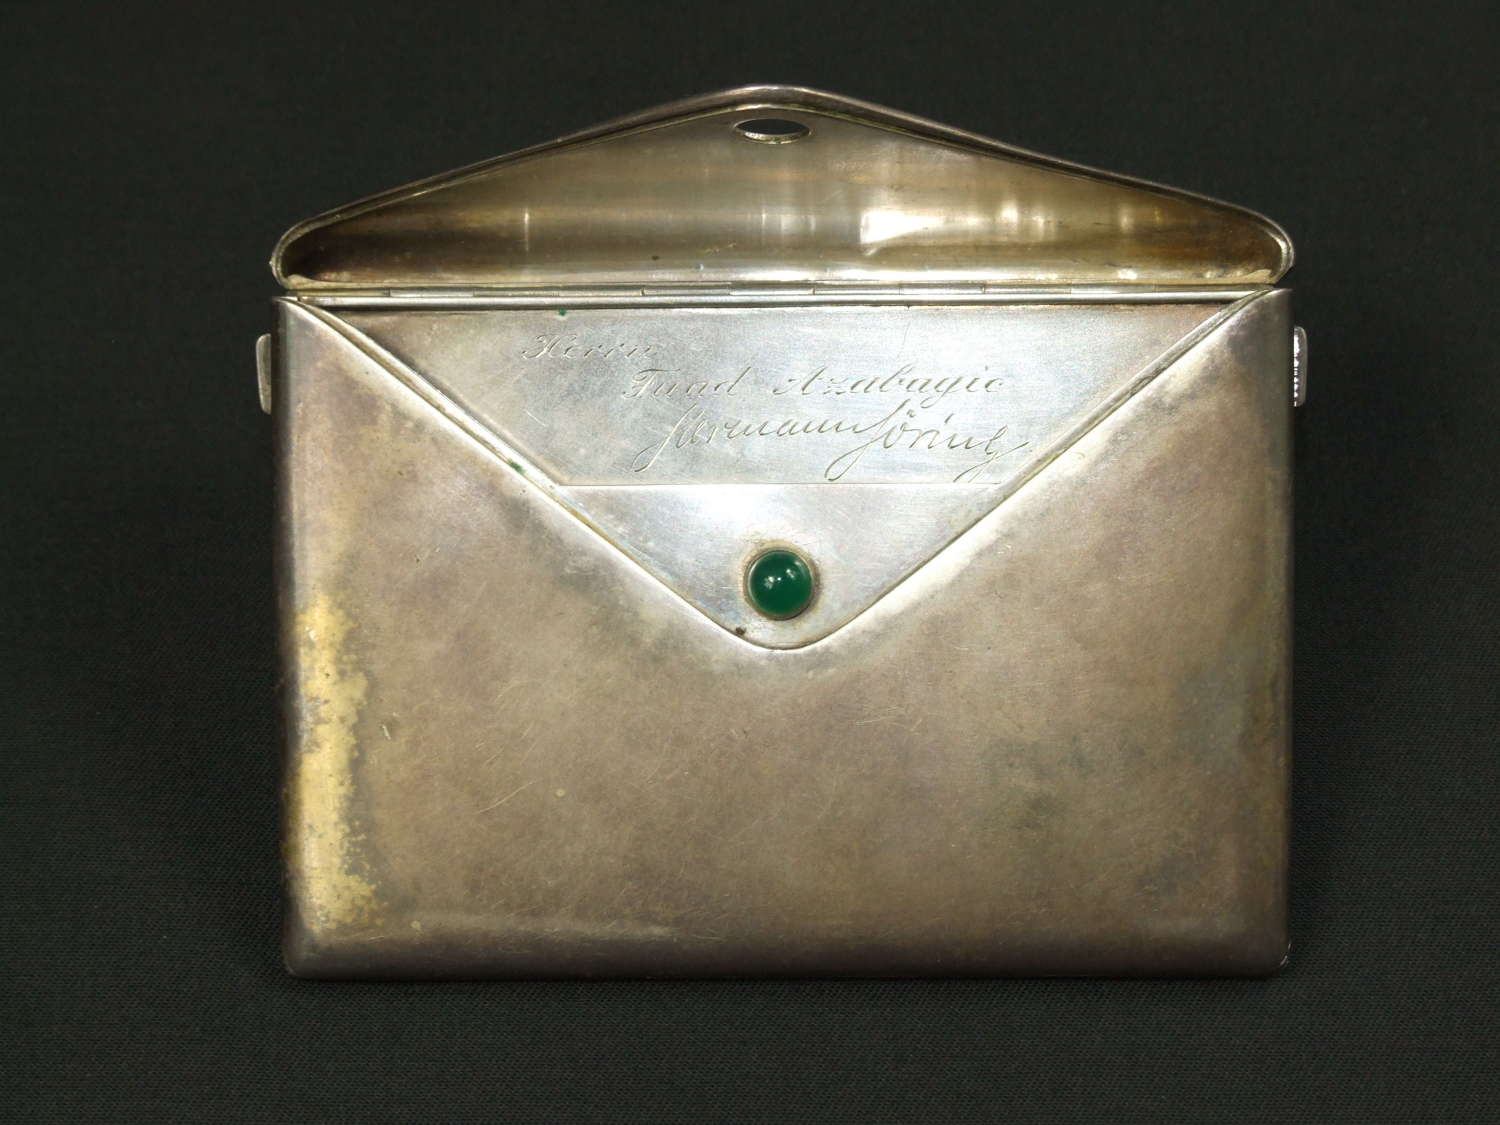 Silver Cigarette Case Presented By Hermann Goring in 1938